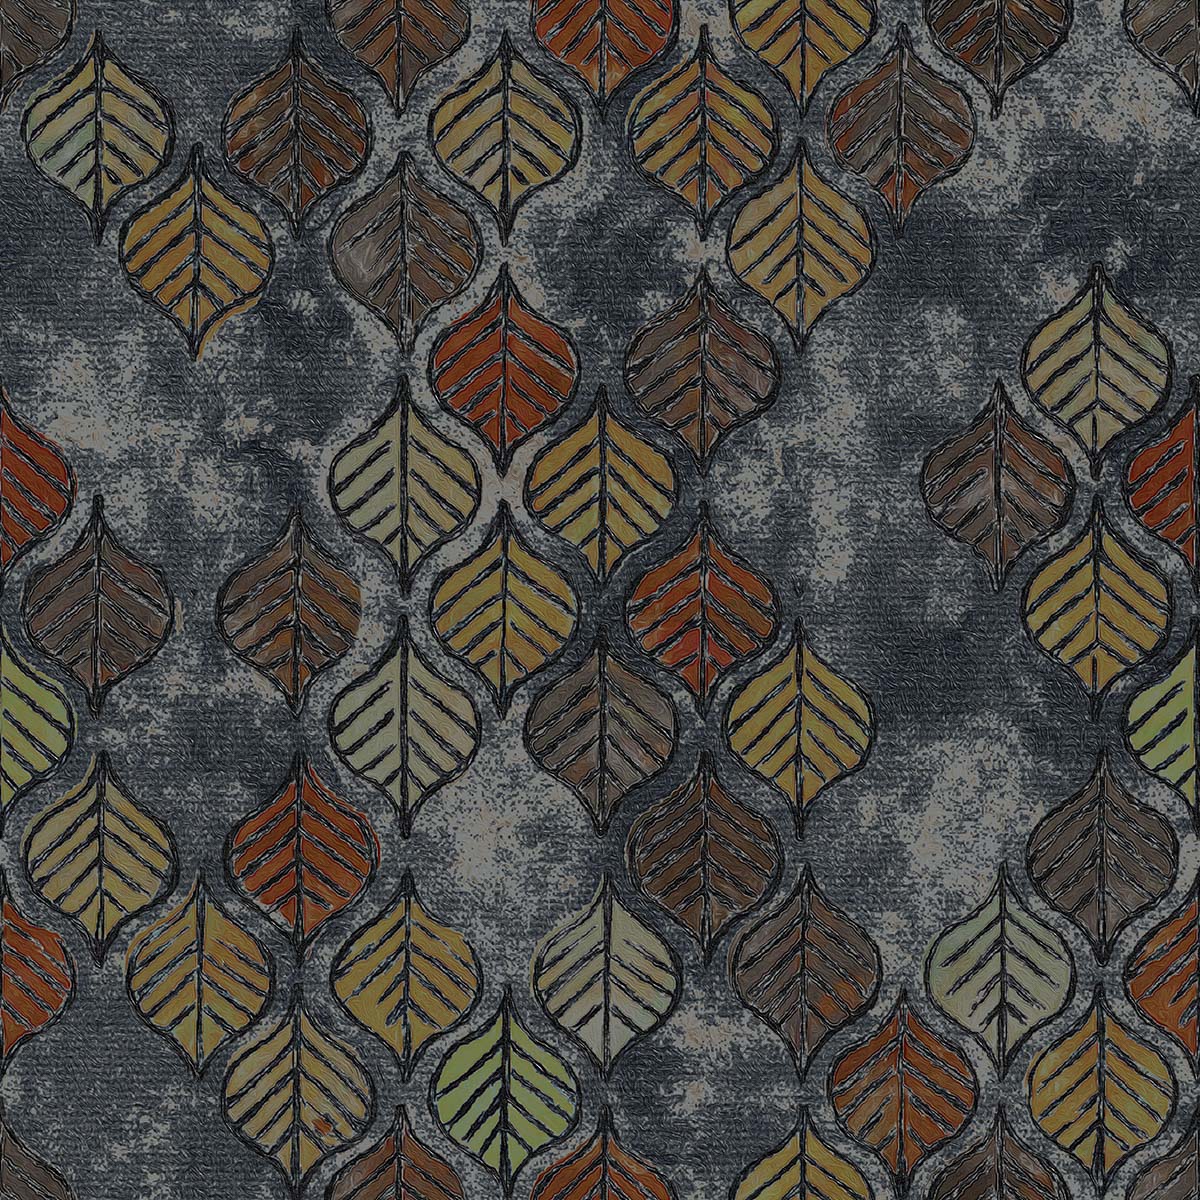 A pattern of leaves on a grey surface